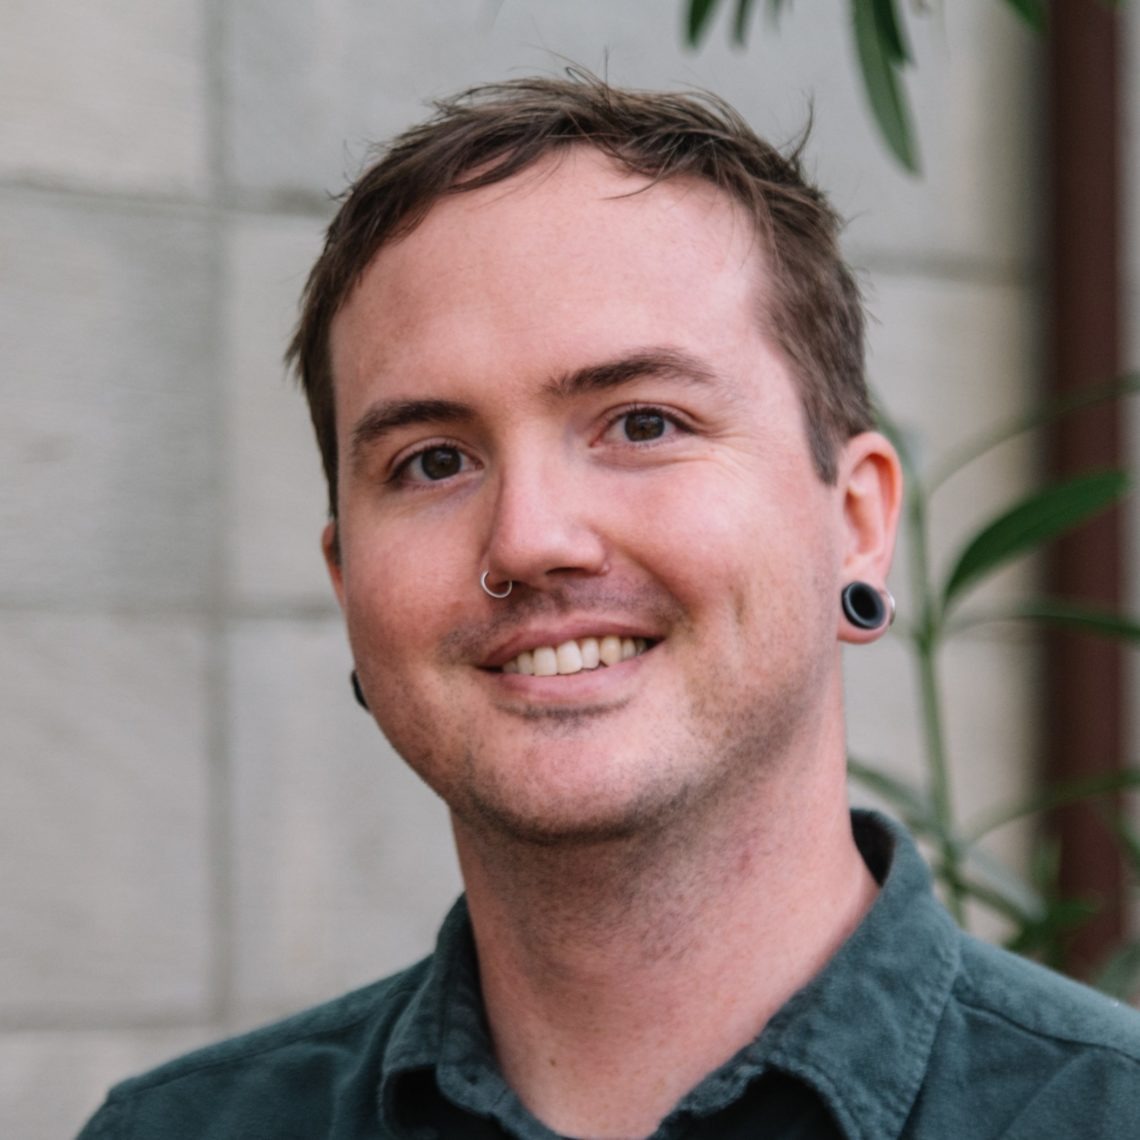 A person with short brown hair, a nose piercing, and gauged earrings smiles while facing the camera. They are wearing a dark green button-up shirt with a background of light-colored stone walls and green foliage, capturing the essence of Berkeley Journalism's vibrant community spirit.